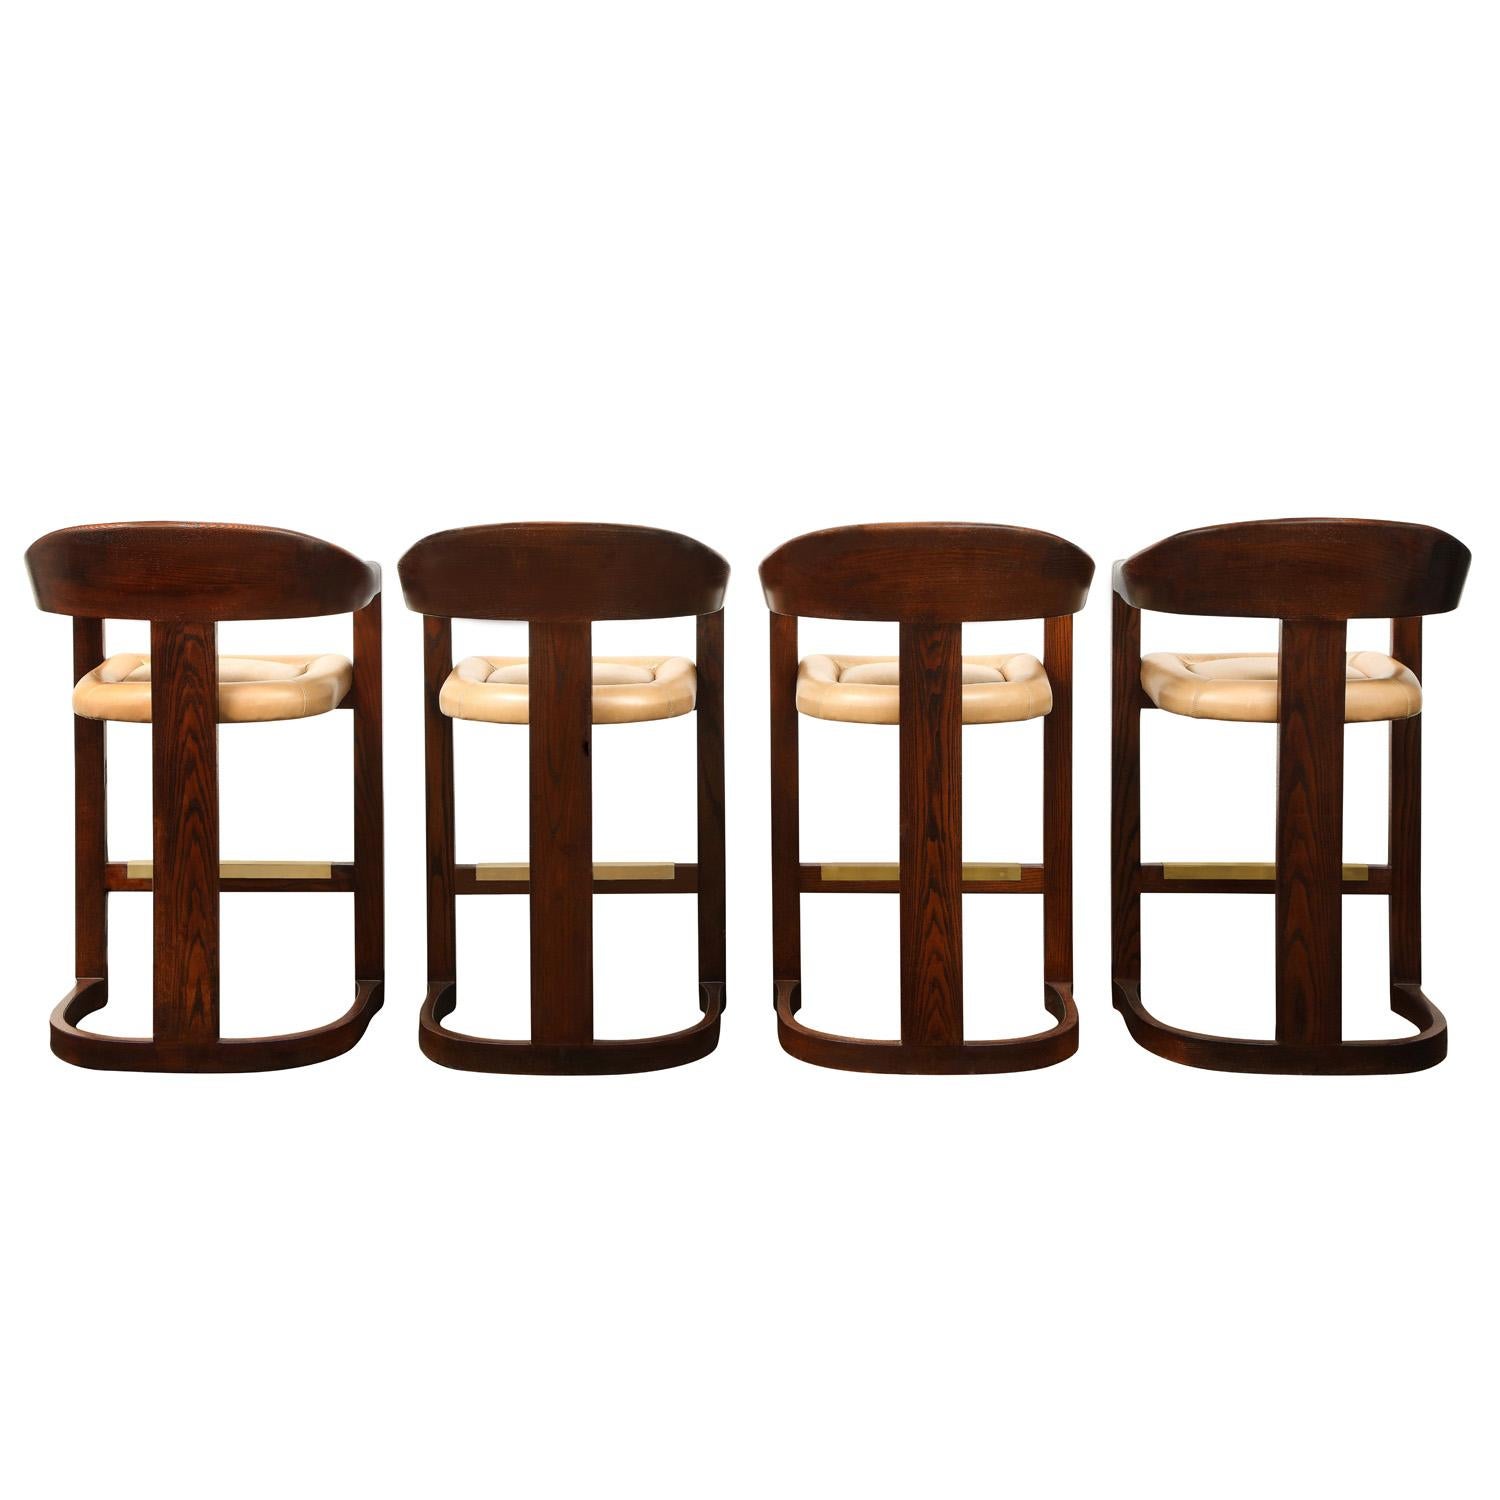 Set of 4 ‘Onassis Bar Stools” in dark oak with upholstered seats and brass foot rests by Karl Springer, American 1980's. Seats are upholstered in leather. The beautiful craftsmanship of these stools makes them very luxurious and